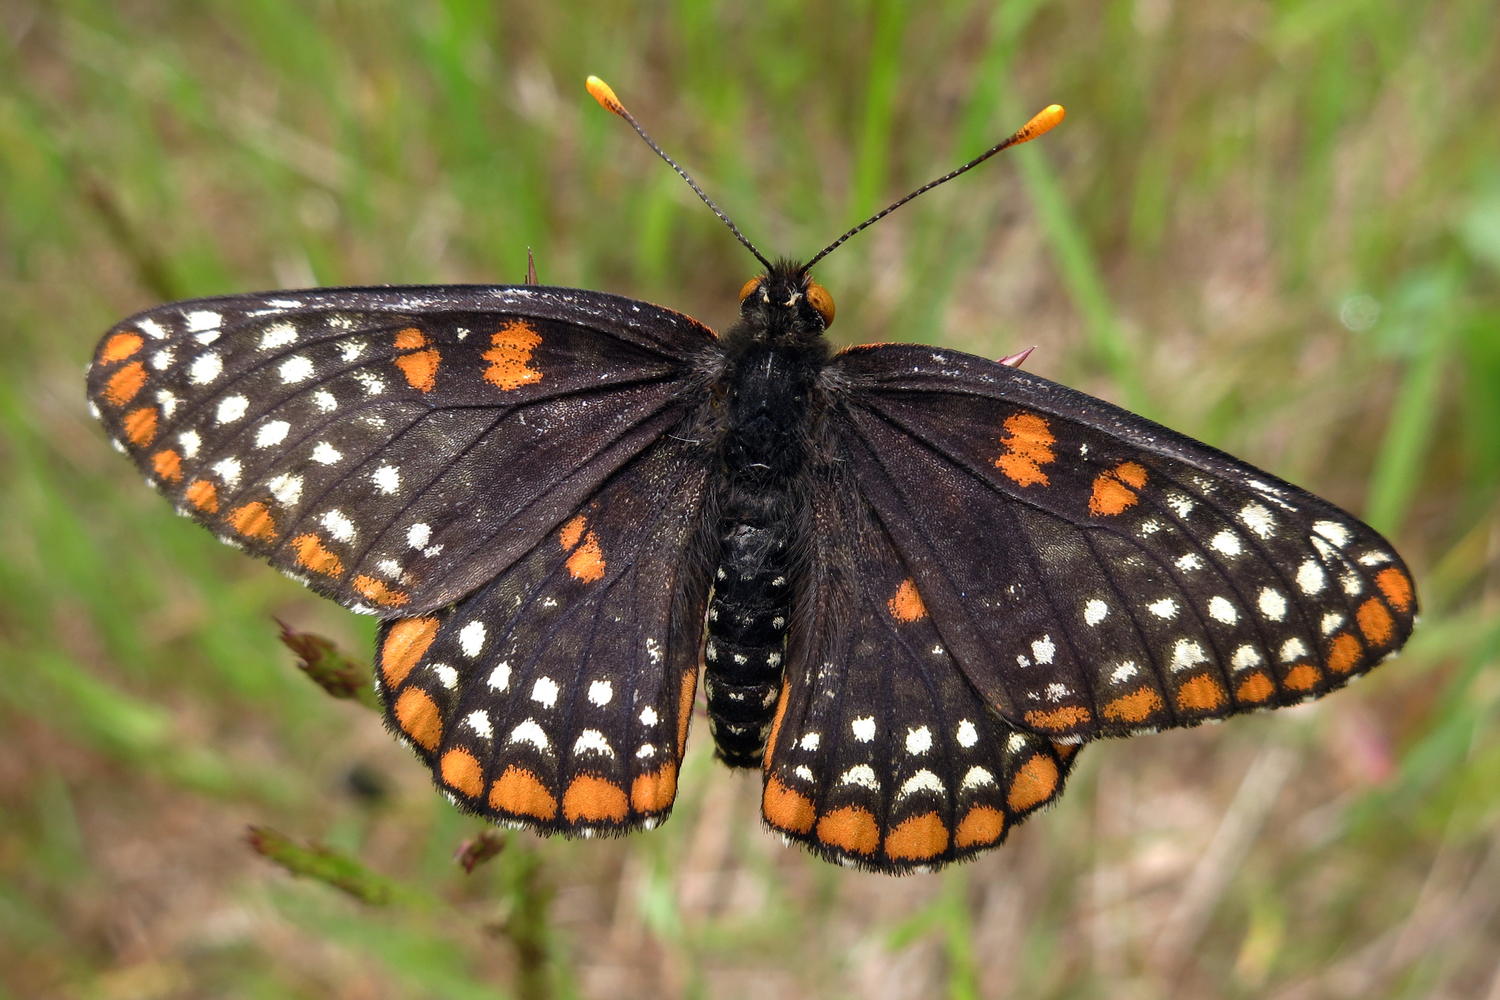 up close view of Baltimore Checkerspot butterfly